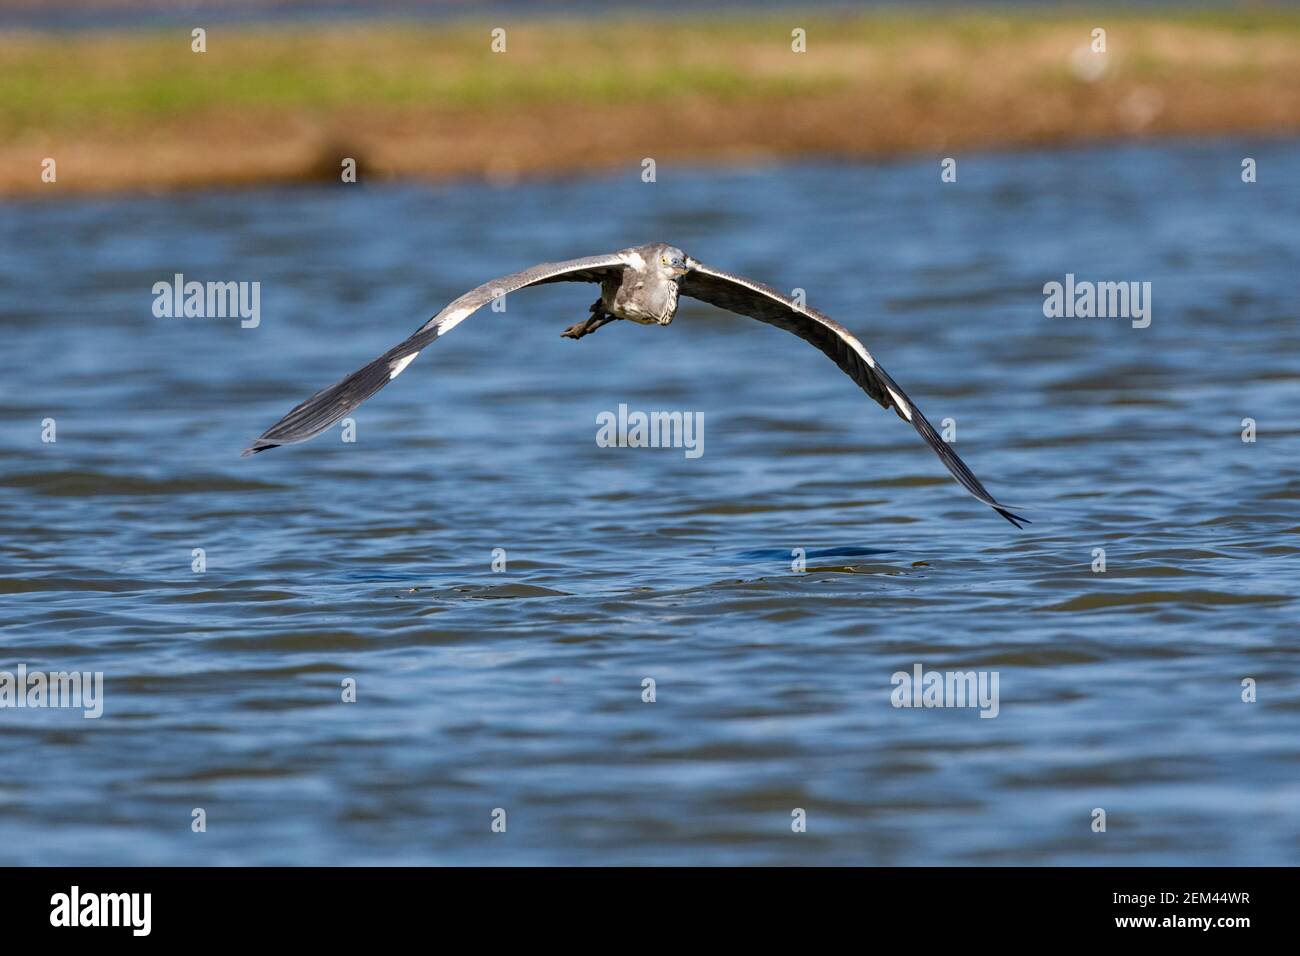 A Grey heron seen flying over water in Zimbabwe's Mana Pools National Park. Stock Photo